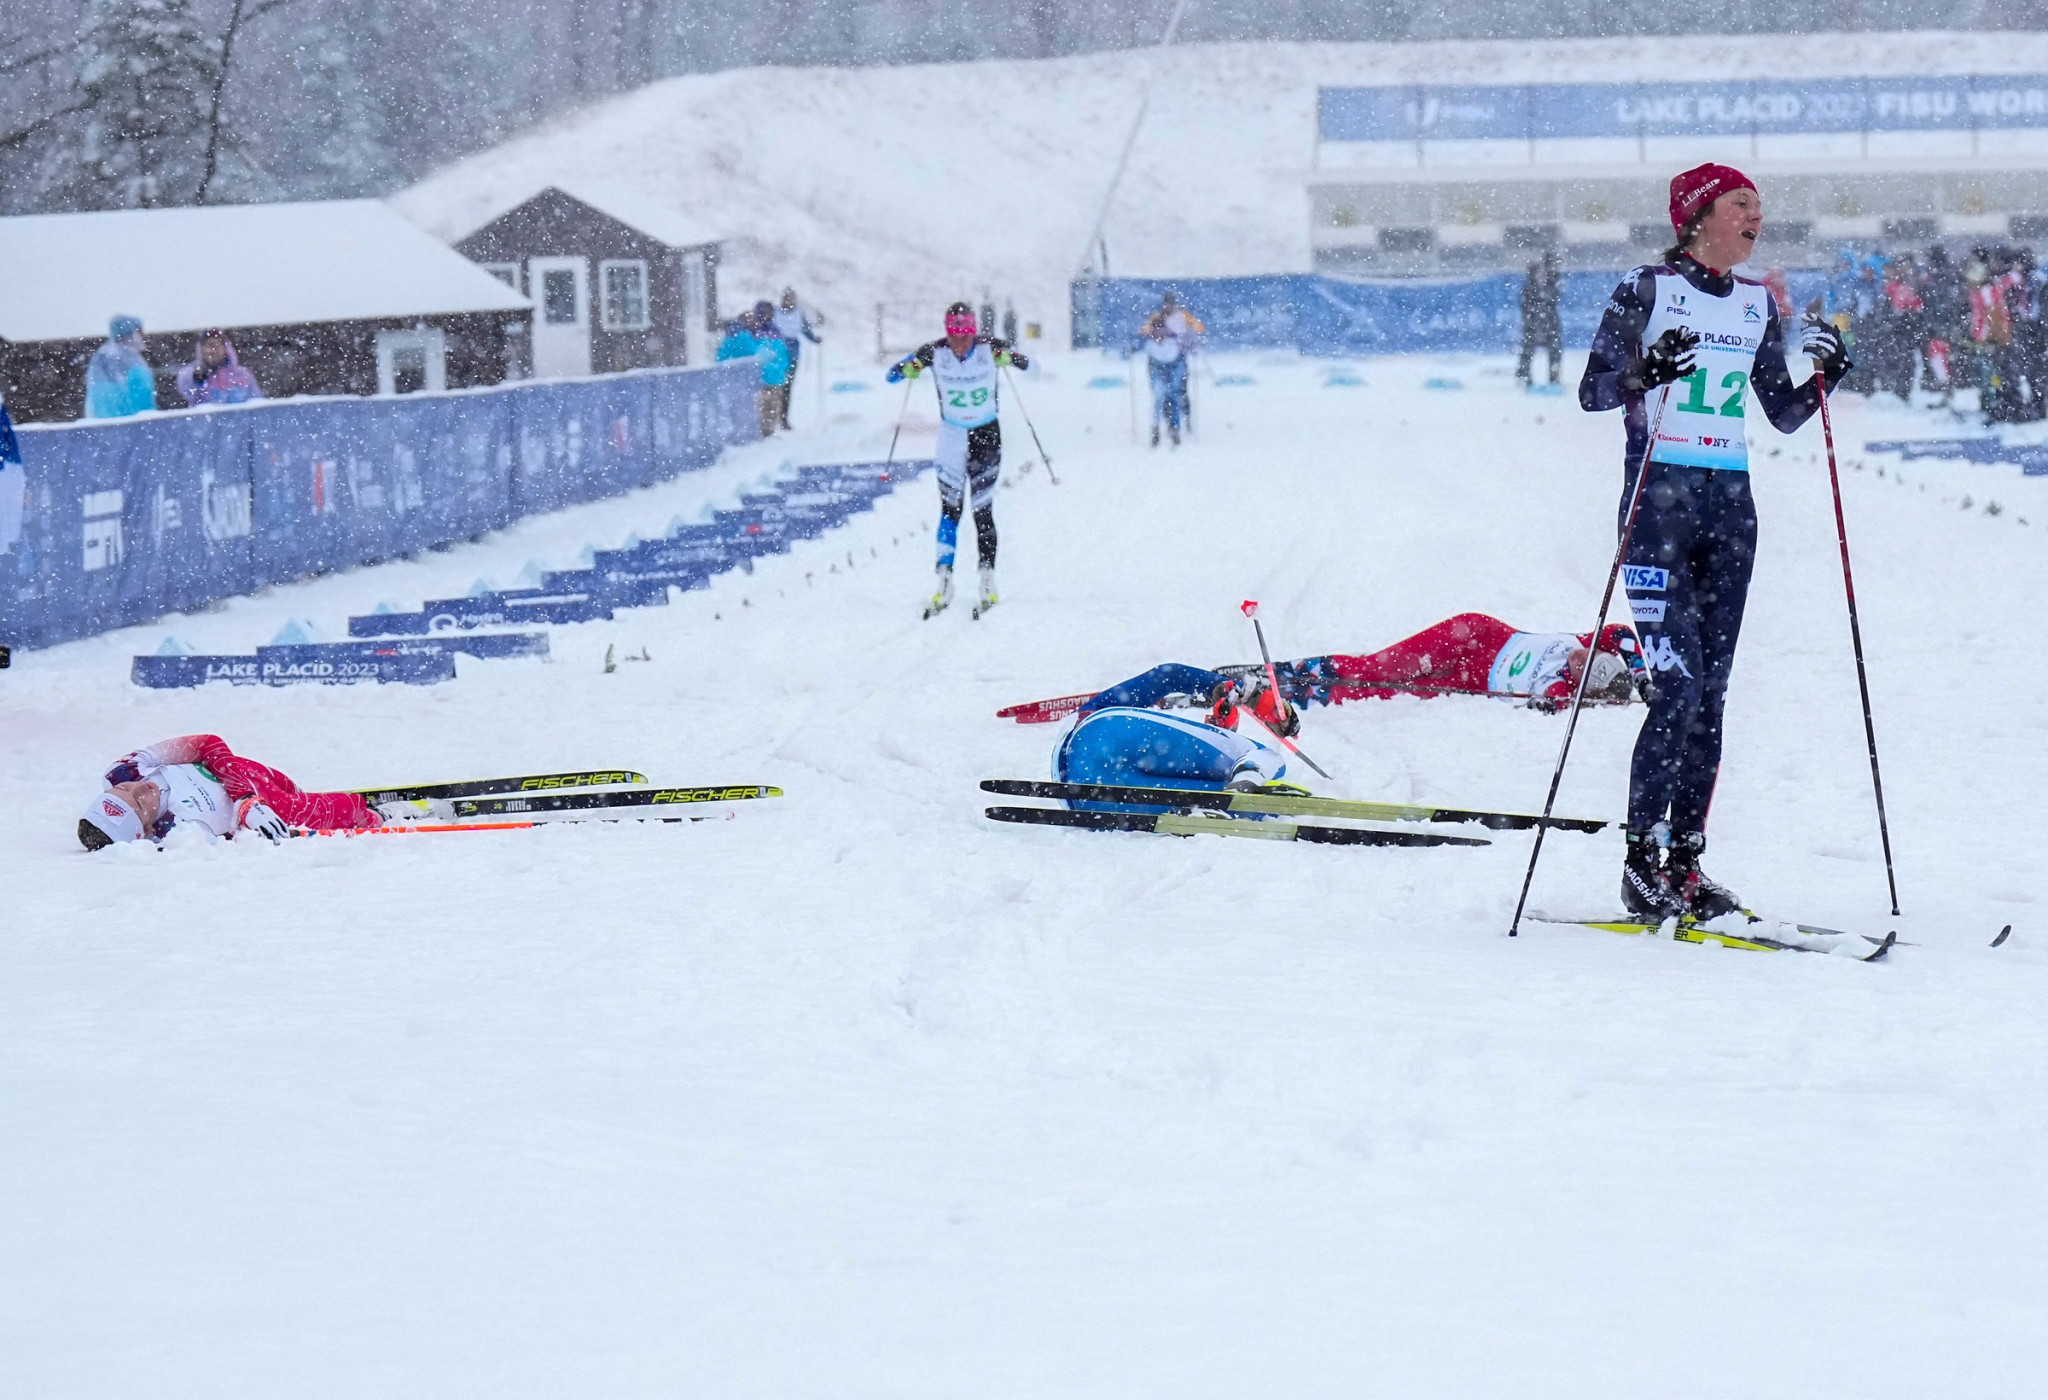 Several cross-country skiiers collapse over the finish line after completing the course ©FISU